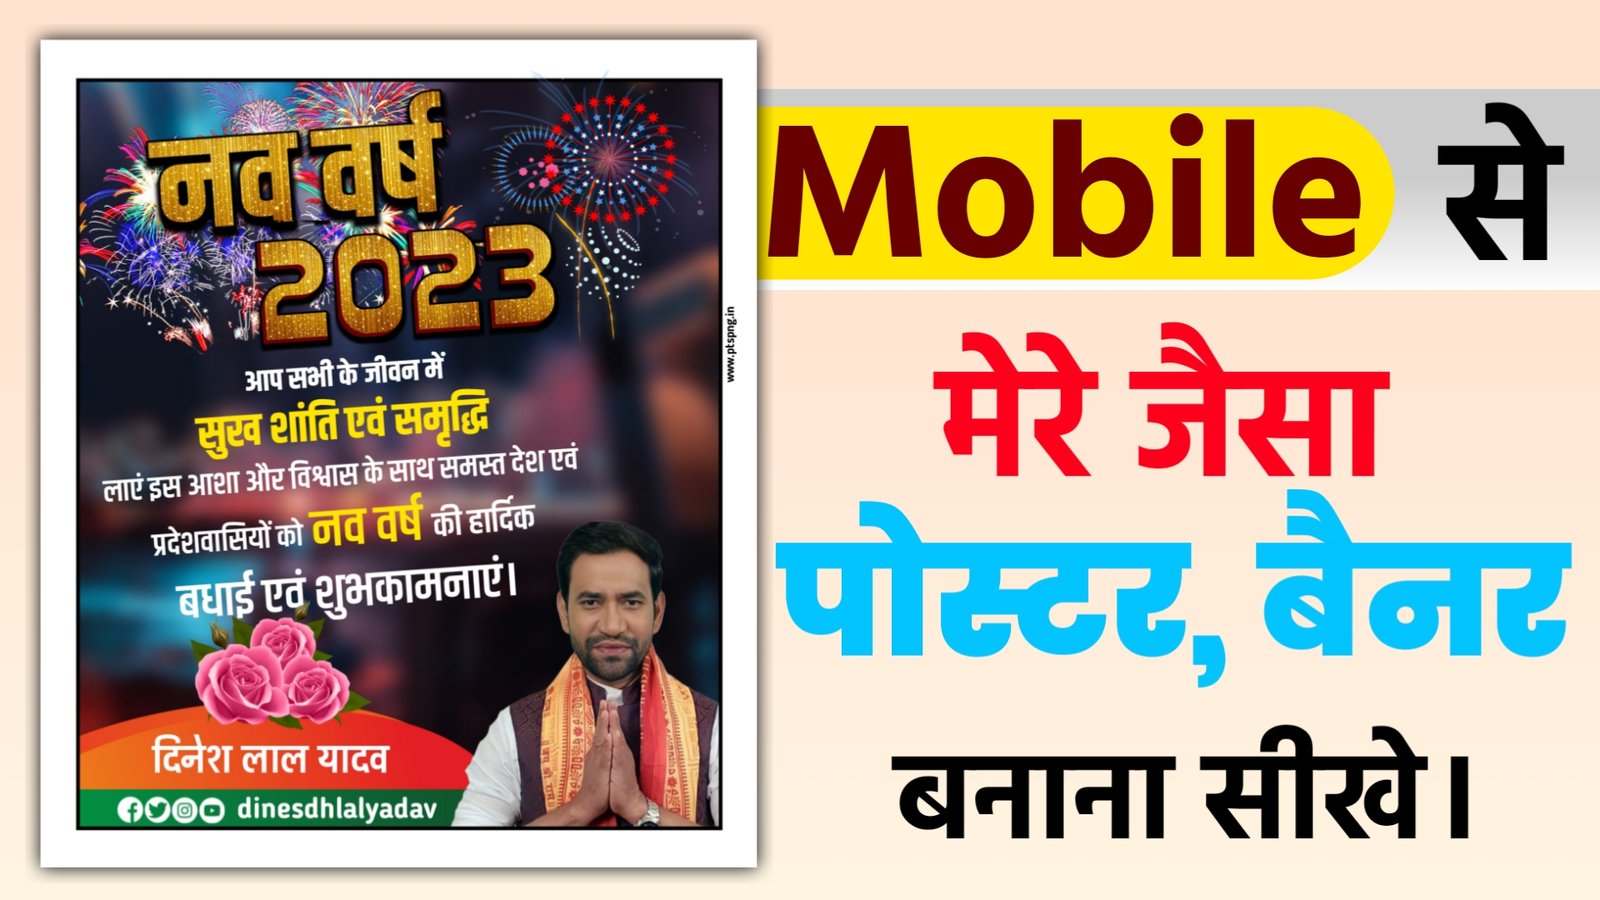 Poster kaise dign kare| banner kaise dign kare|happy new year poster banye mobile se|